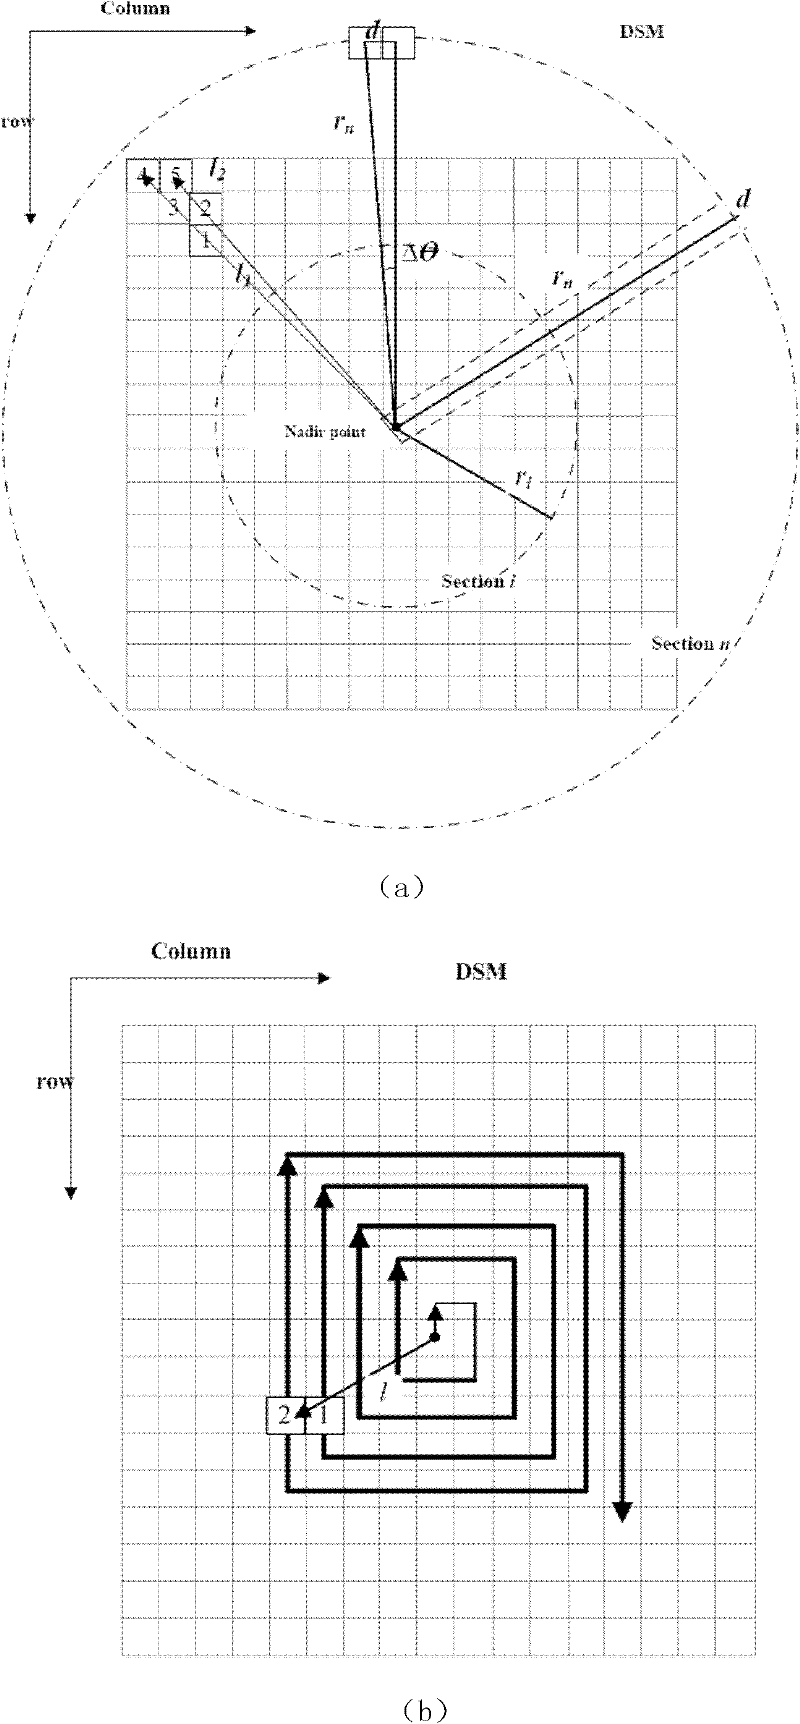 True-orthophotomap making method oriented to large-scale production